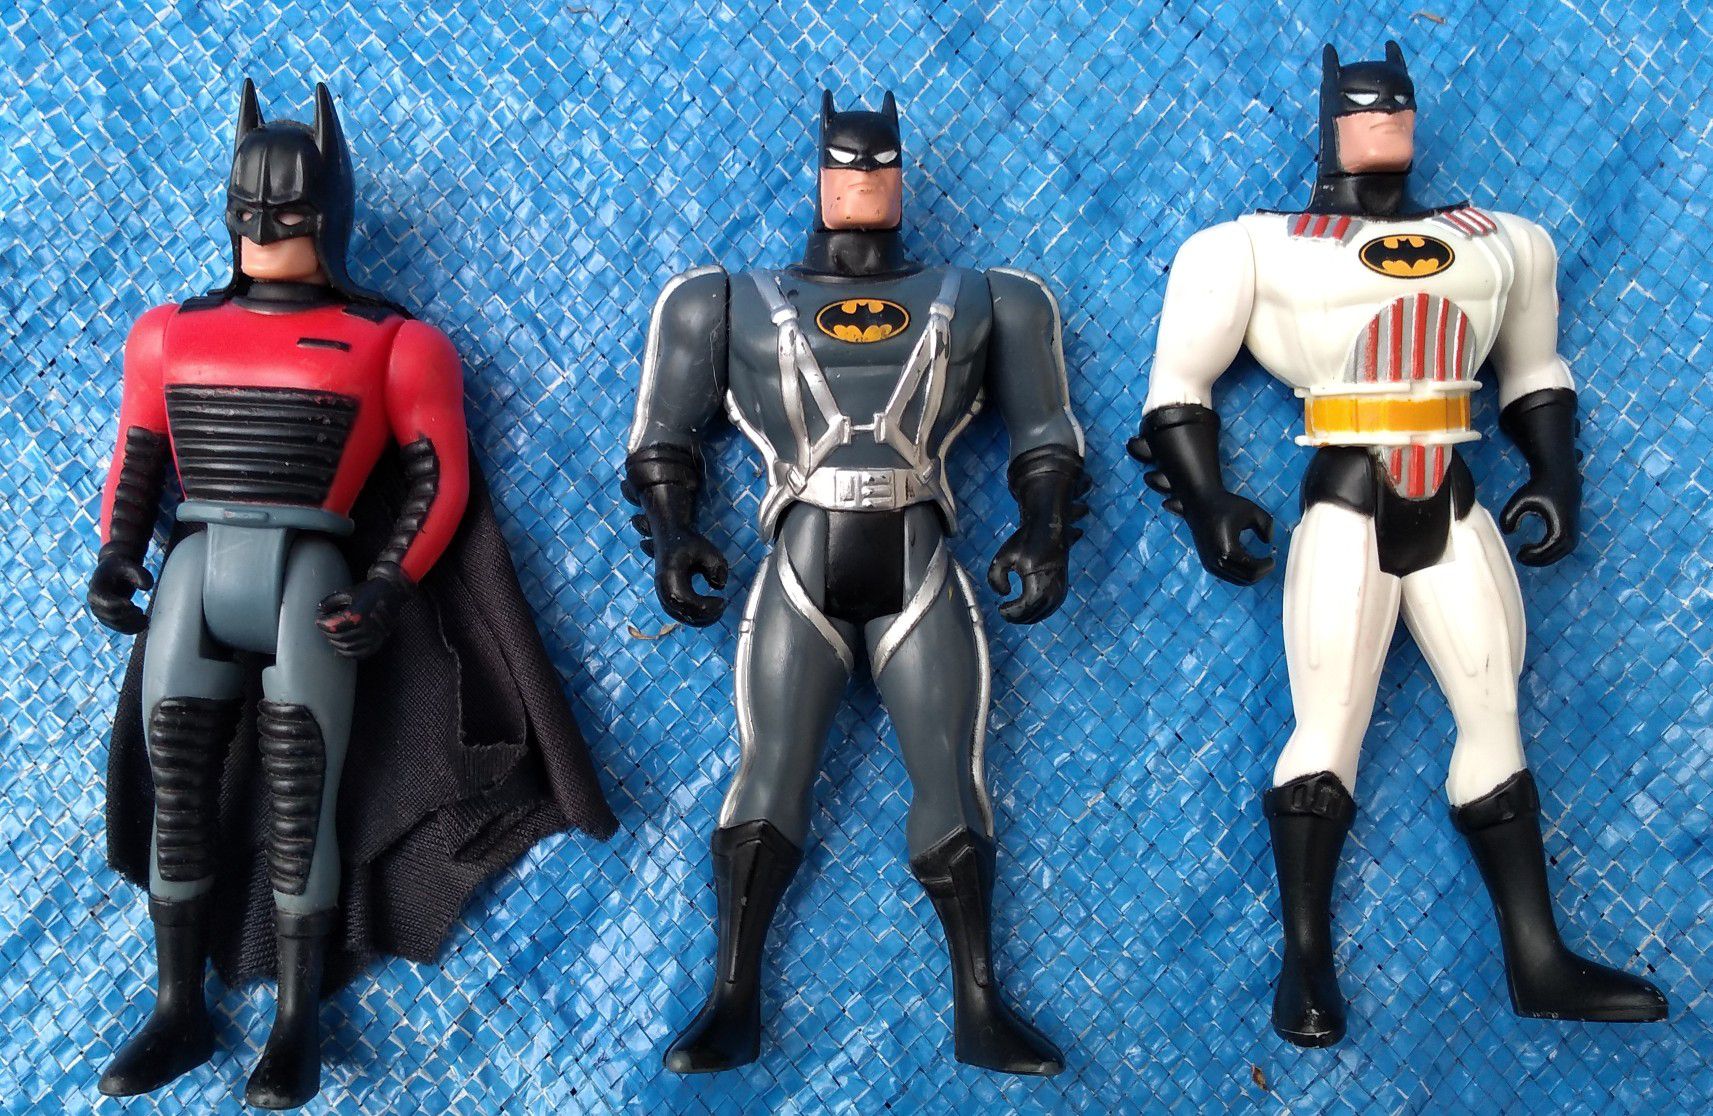 1993 Kenner Batman The Animated Series Action Figure Lot DC Comics Vintage Collectible